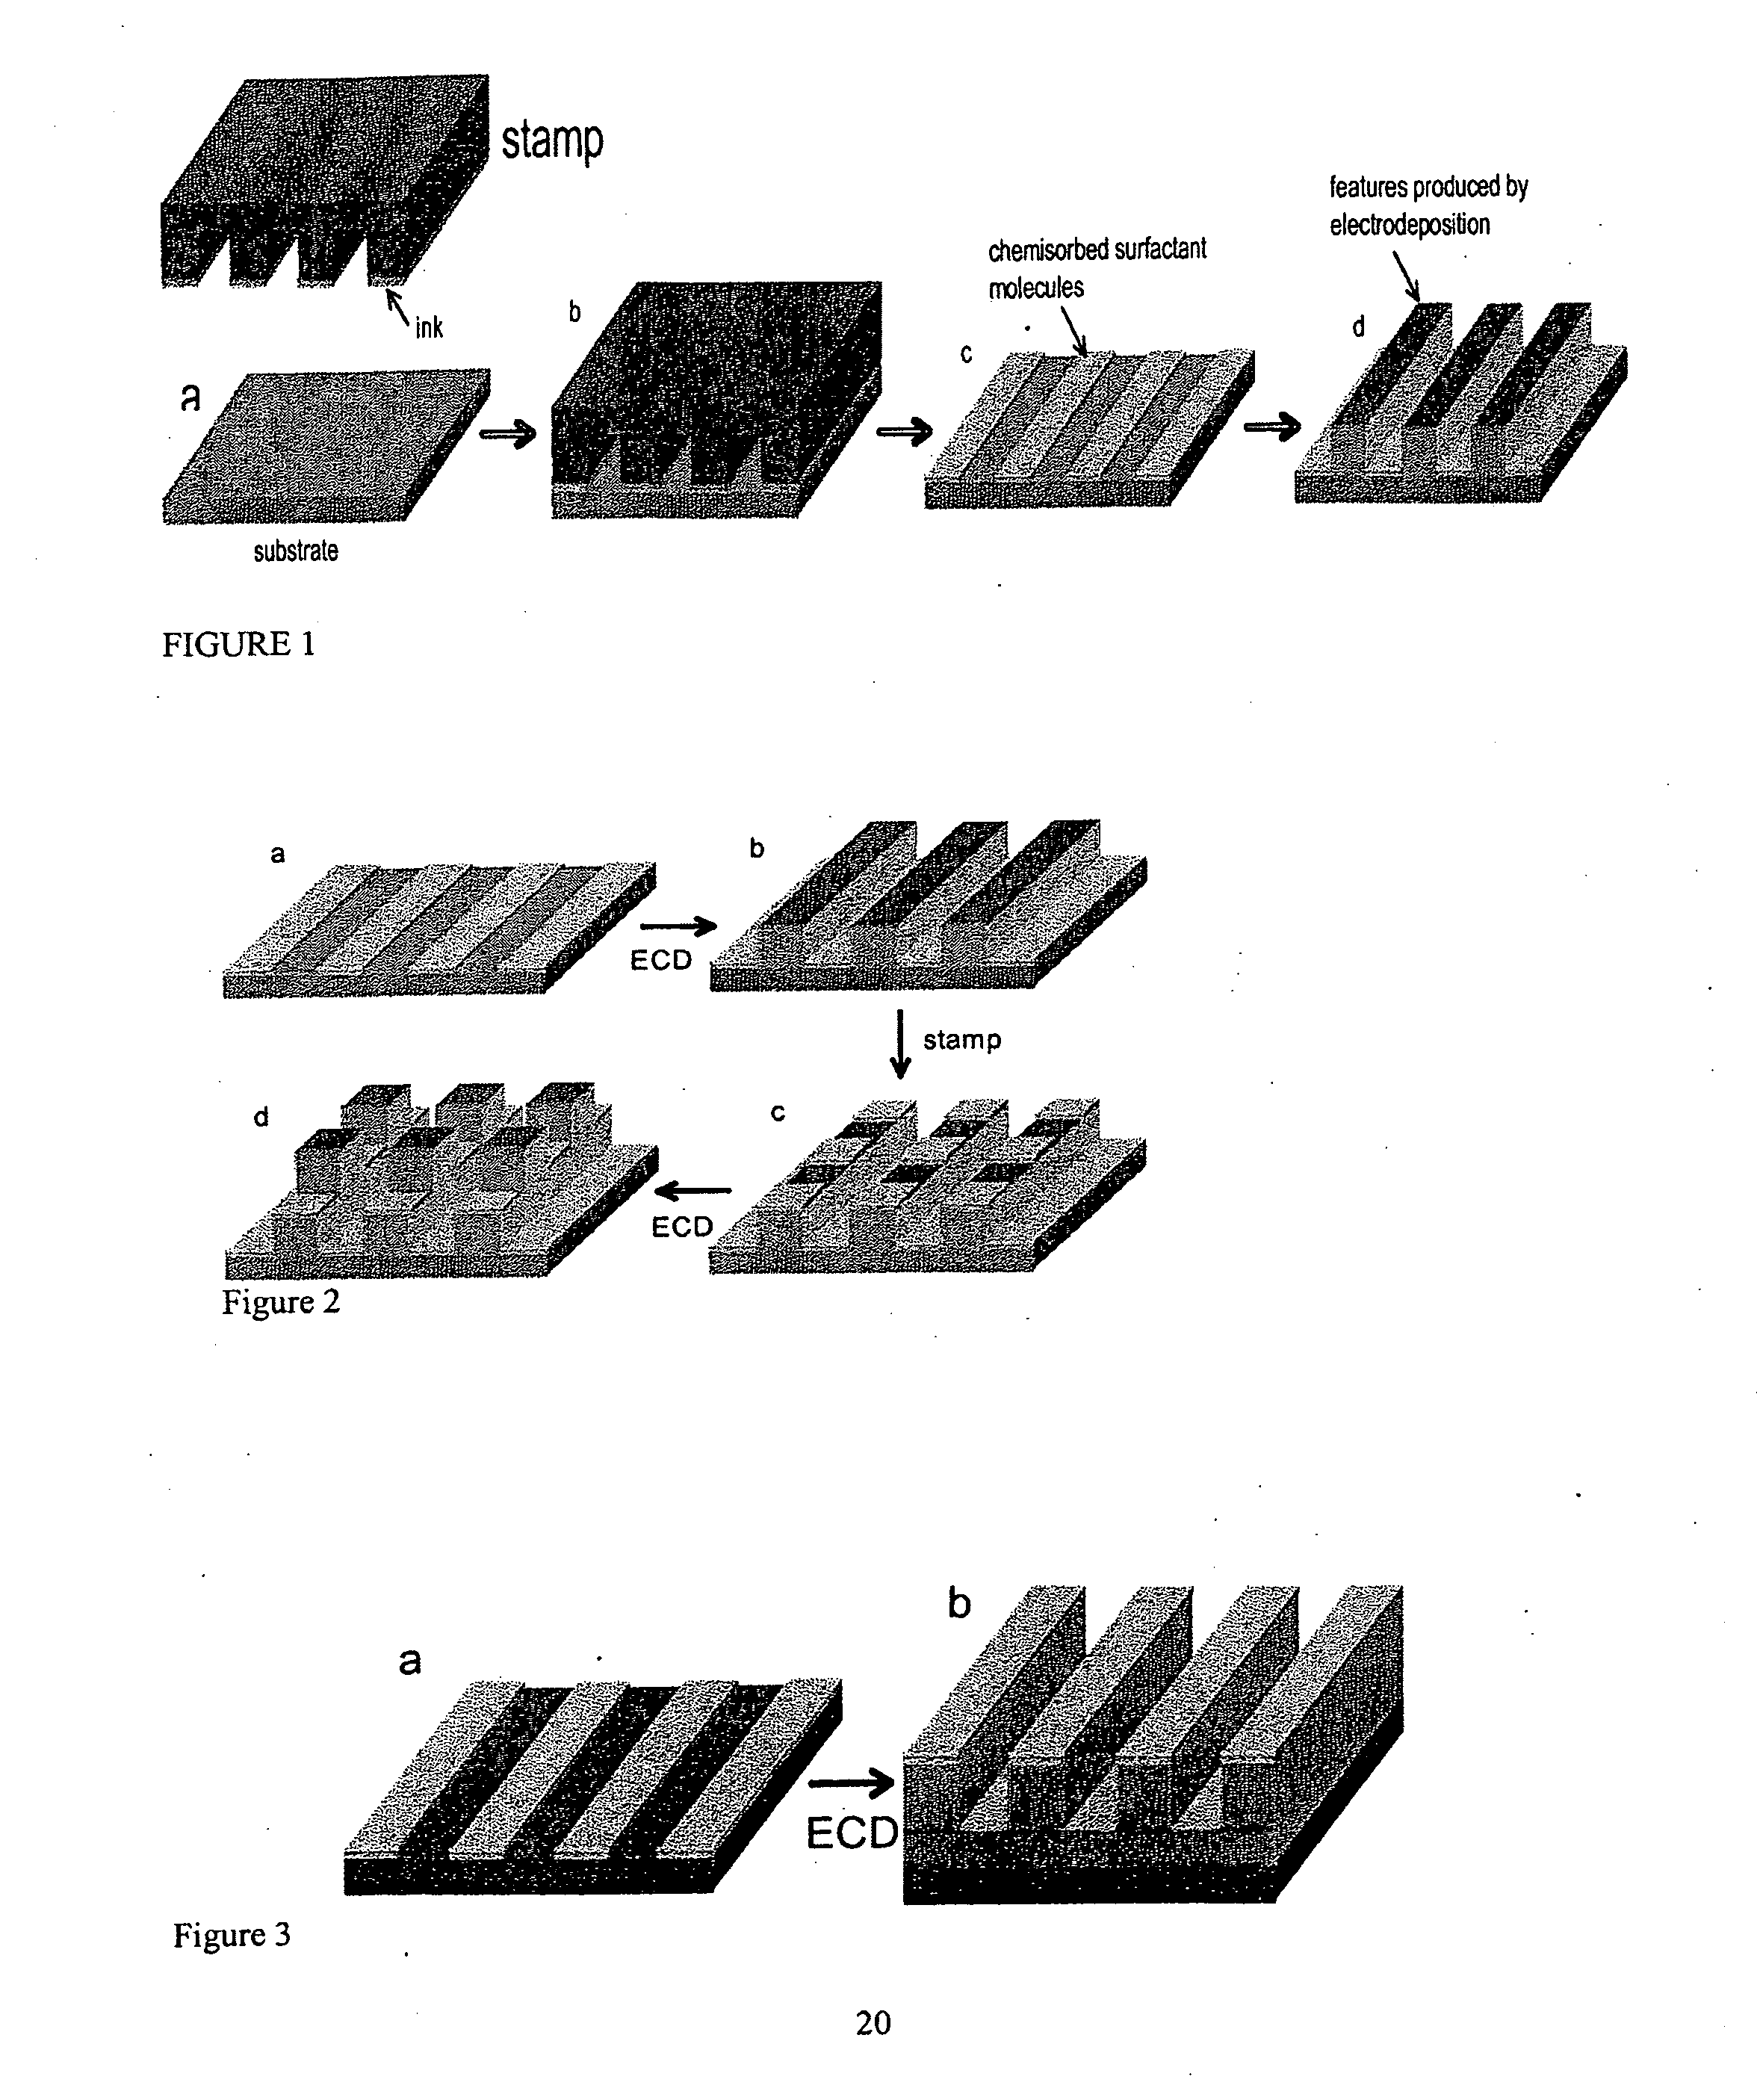 Method for Producing Patterned Structures by Printing a Surfactant Resist on a Substrate for Electrodeposition